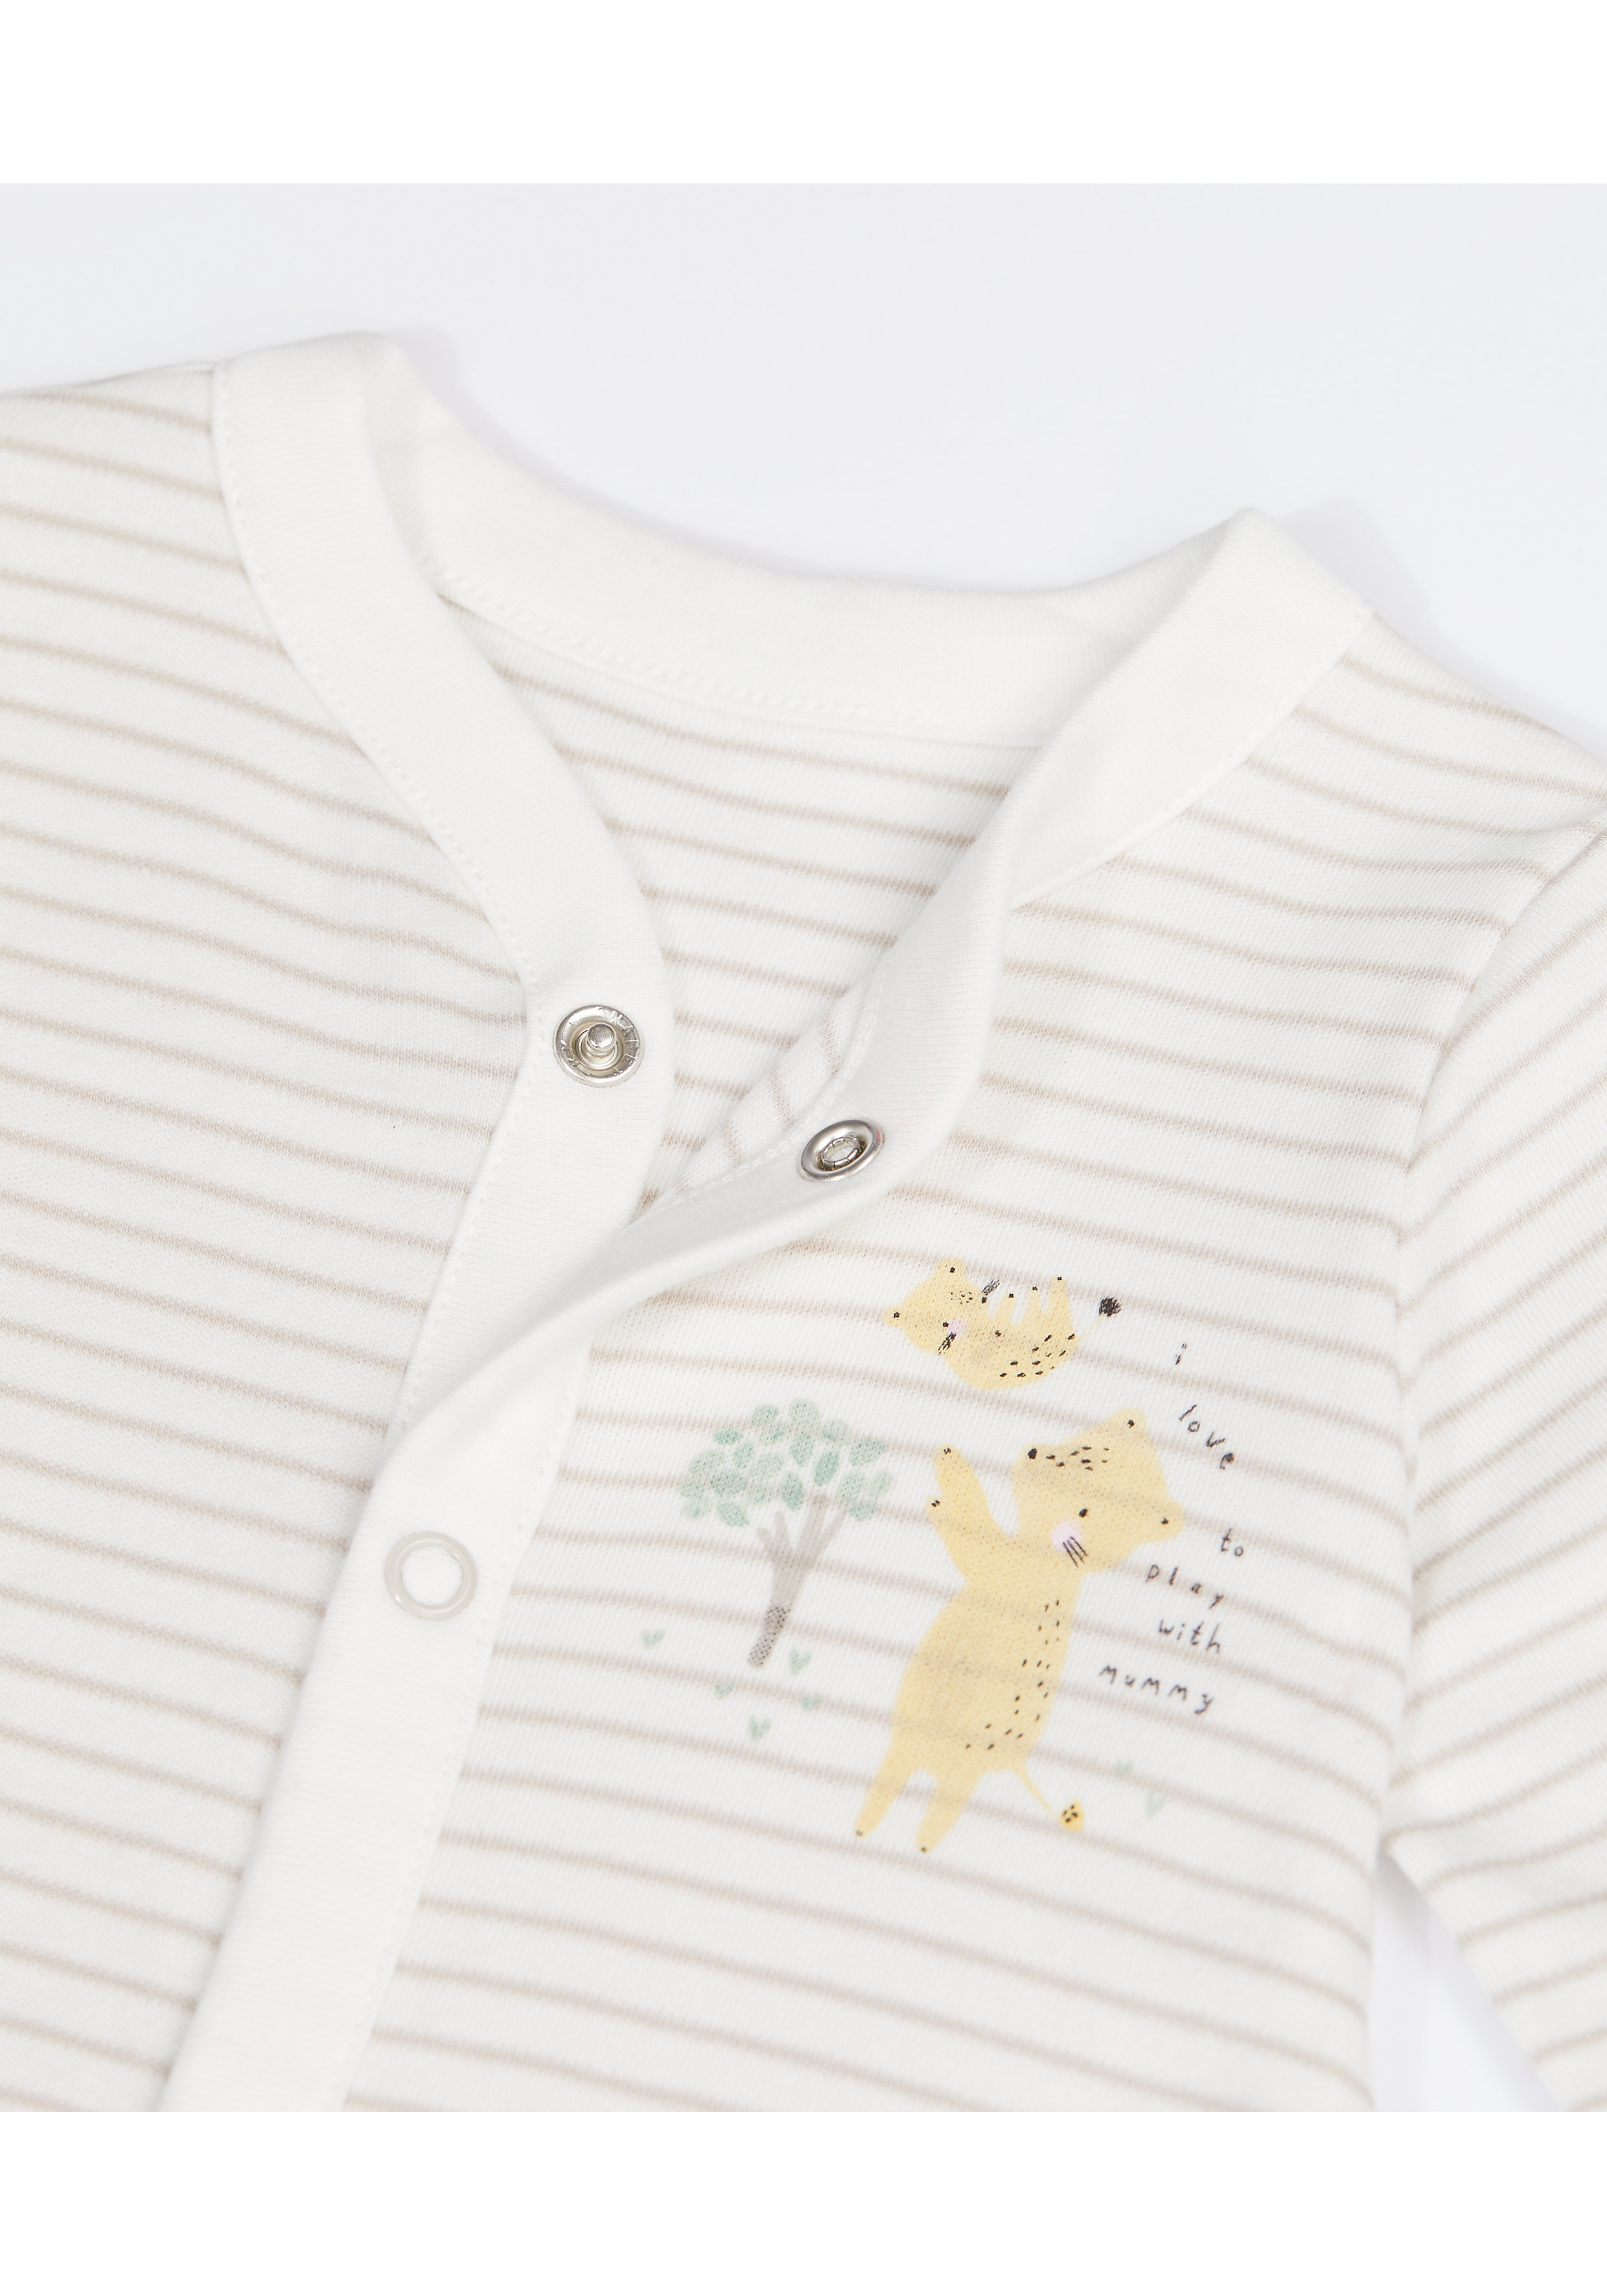 Mothercare | Unisex Sleepsuit Stripes And Animal Print  - Pack Of 3 - Cream 2